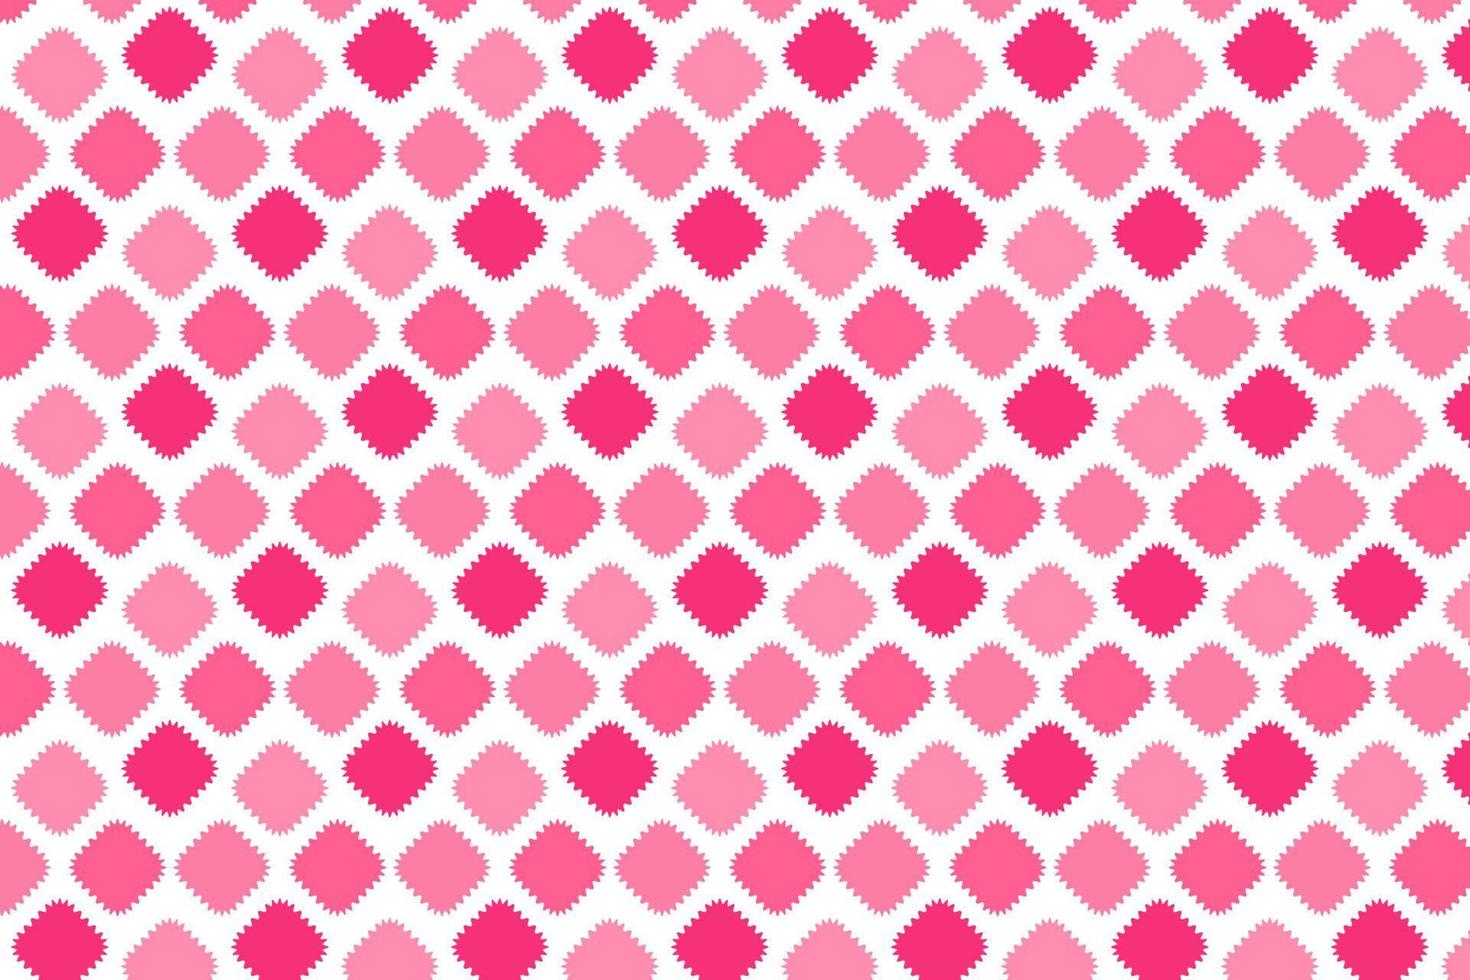 Floor tiles - vintage pattern with quatrefoil, Vector background, Plain color - easy to repeat, pink.